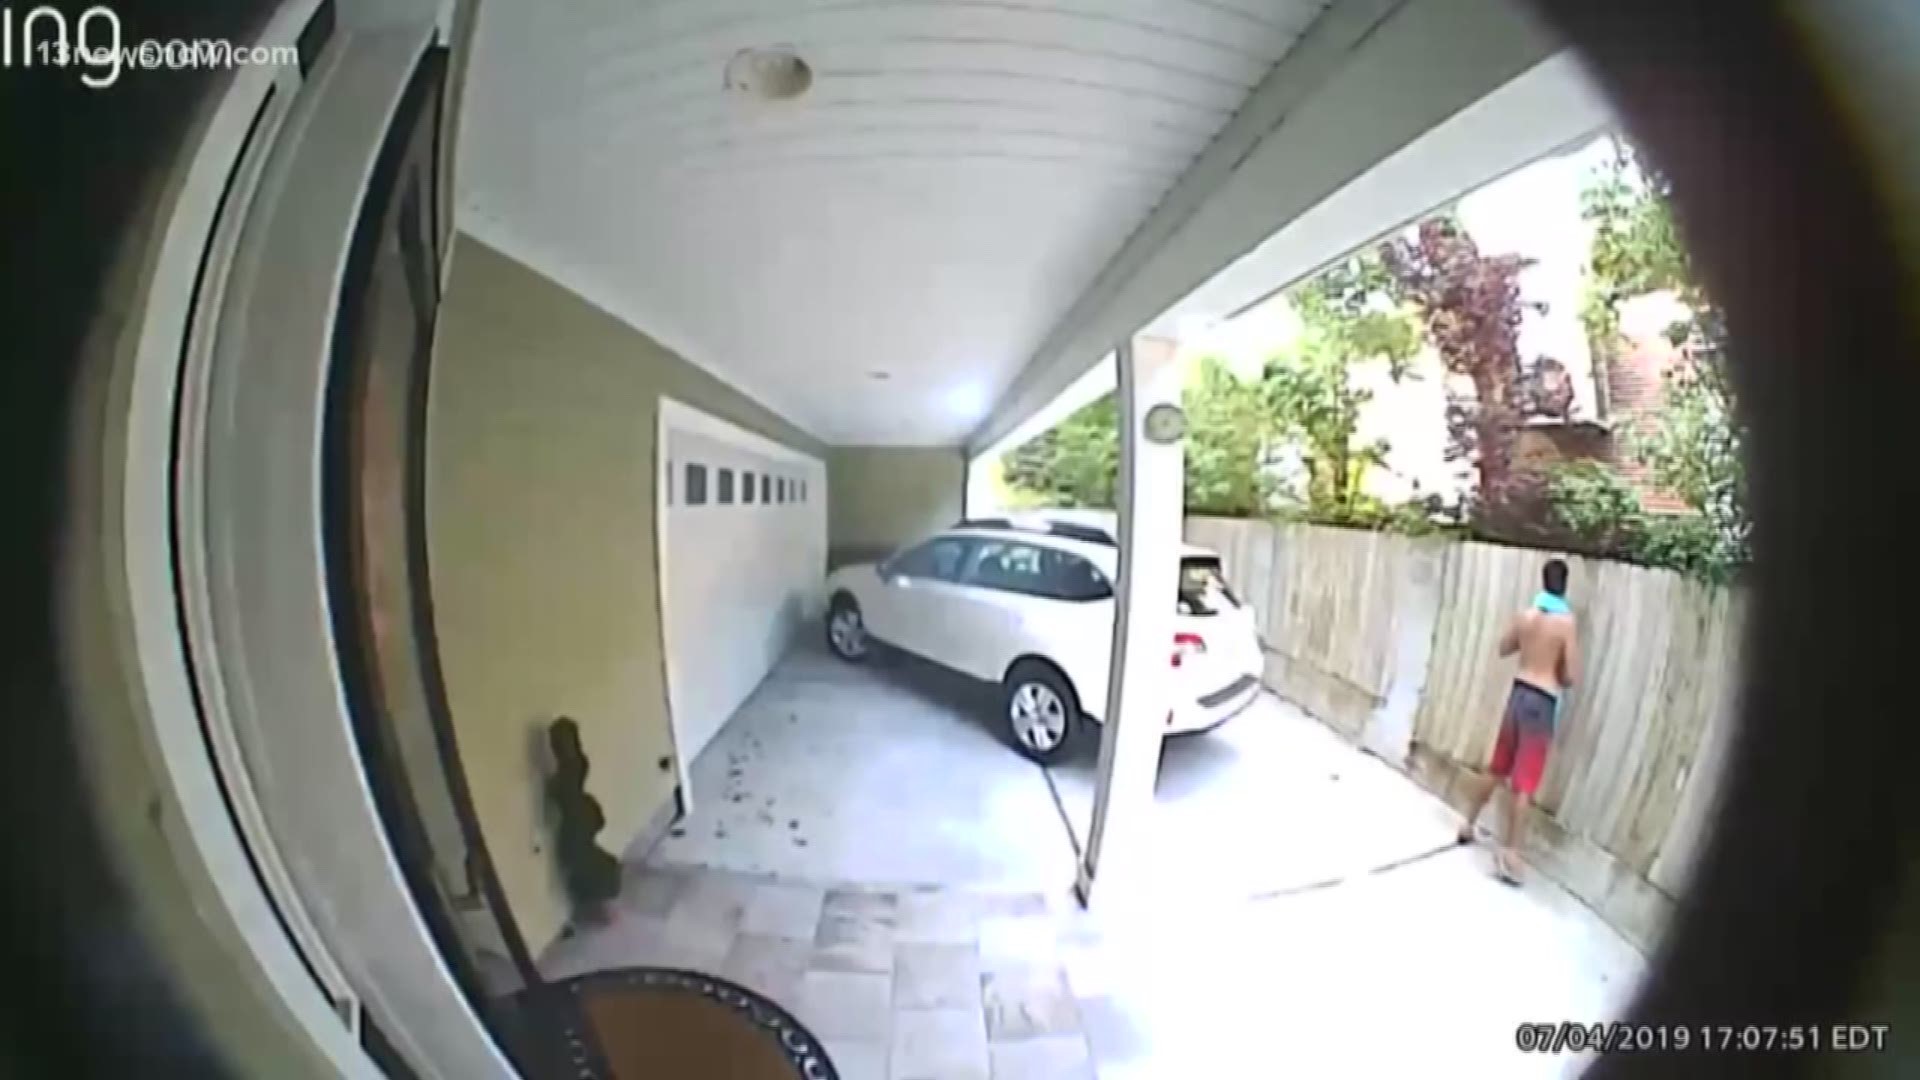 The family thought it was the neighbor's dog at first, but when they checked their doorbell camera a man was seen in their driveway. She said this is the second time this has happened.